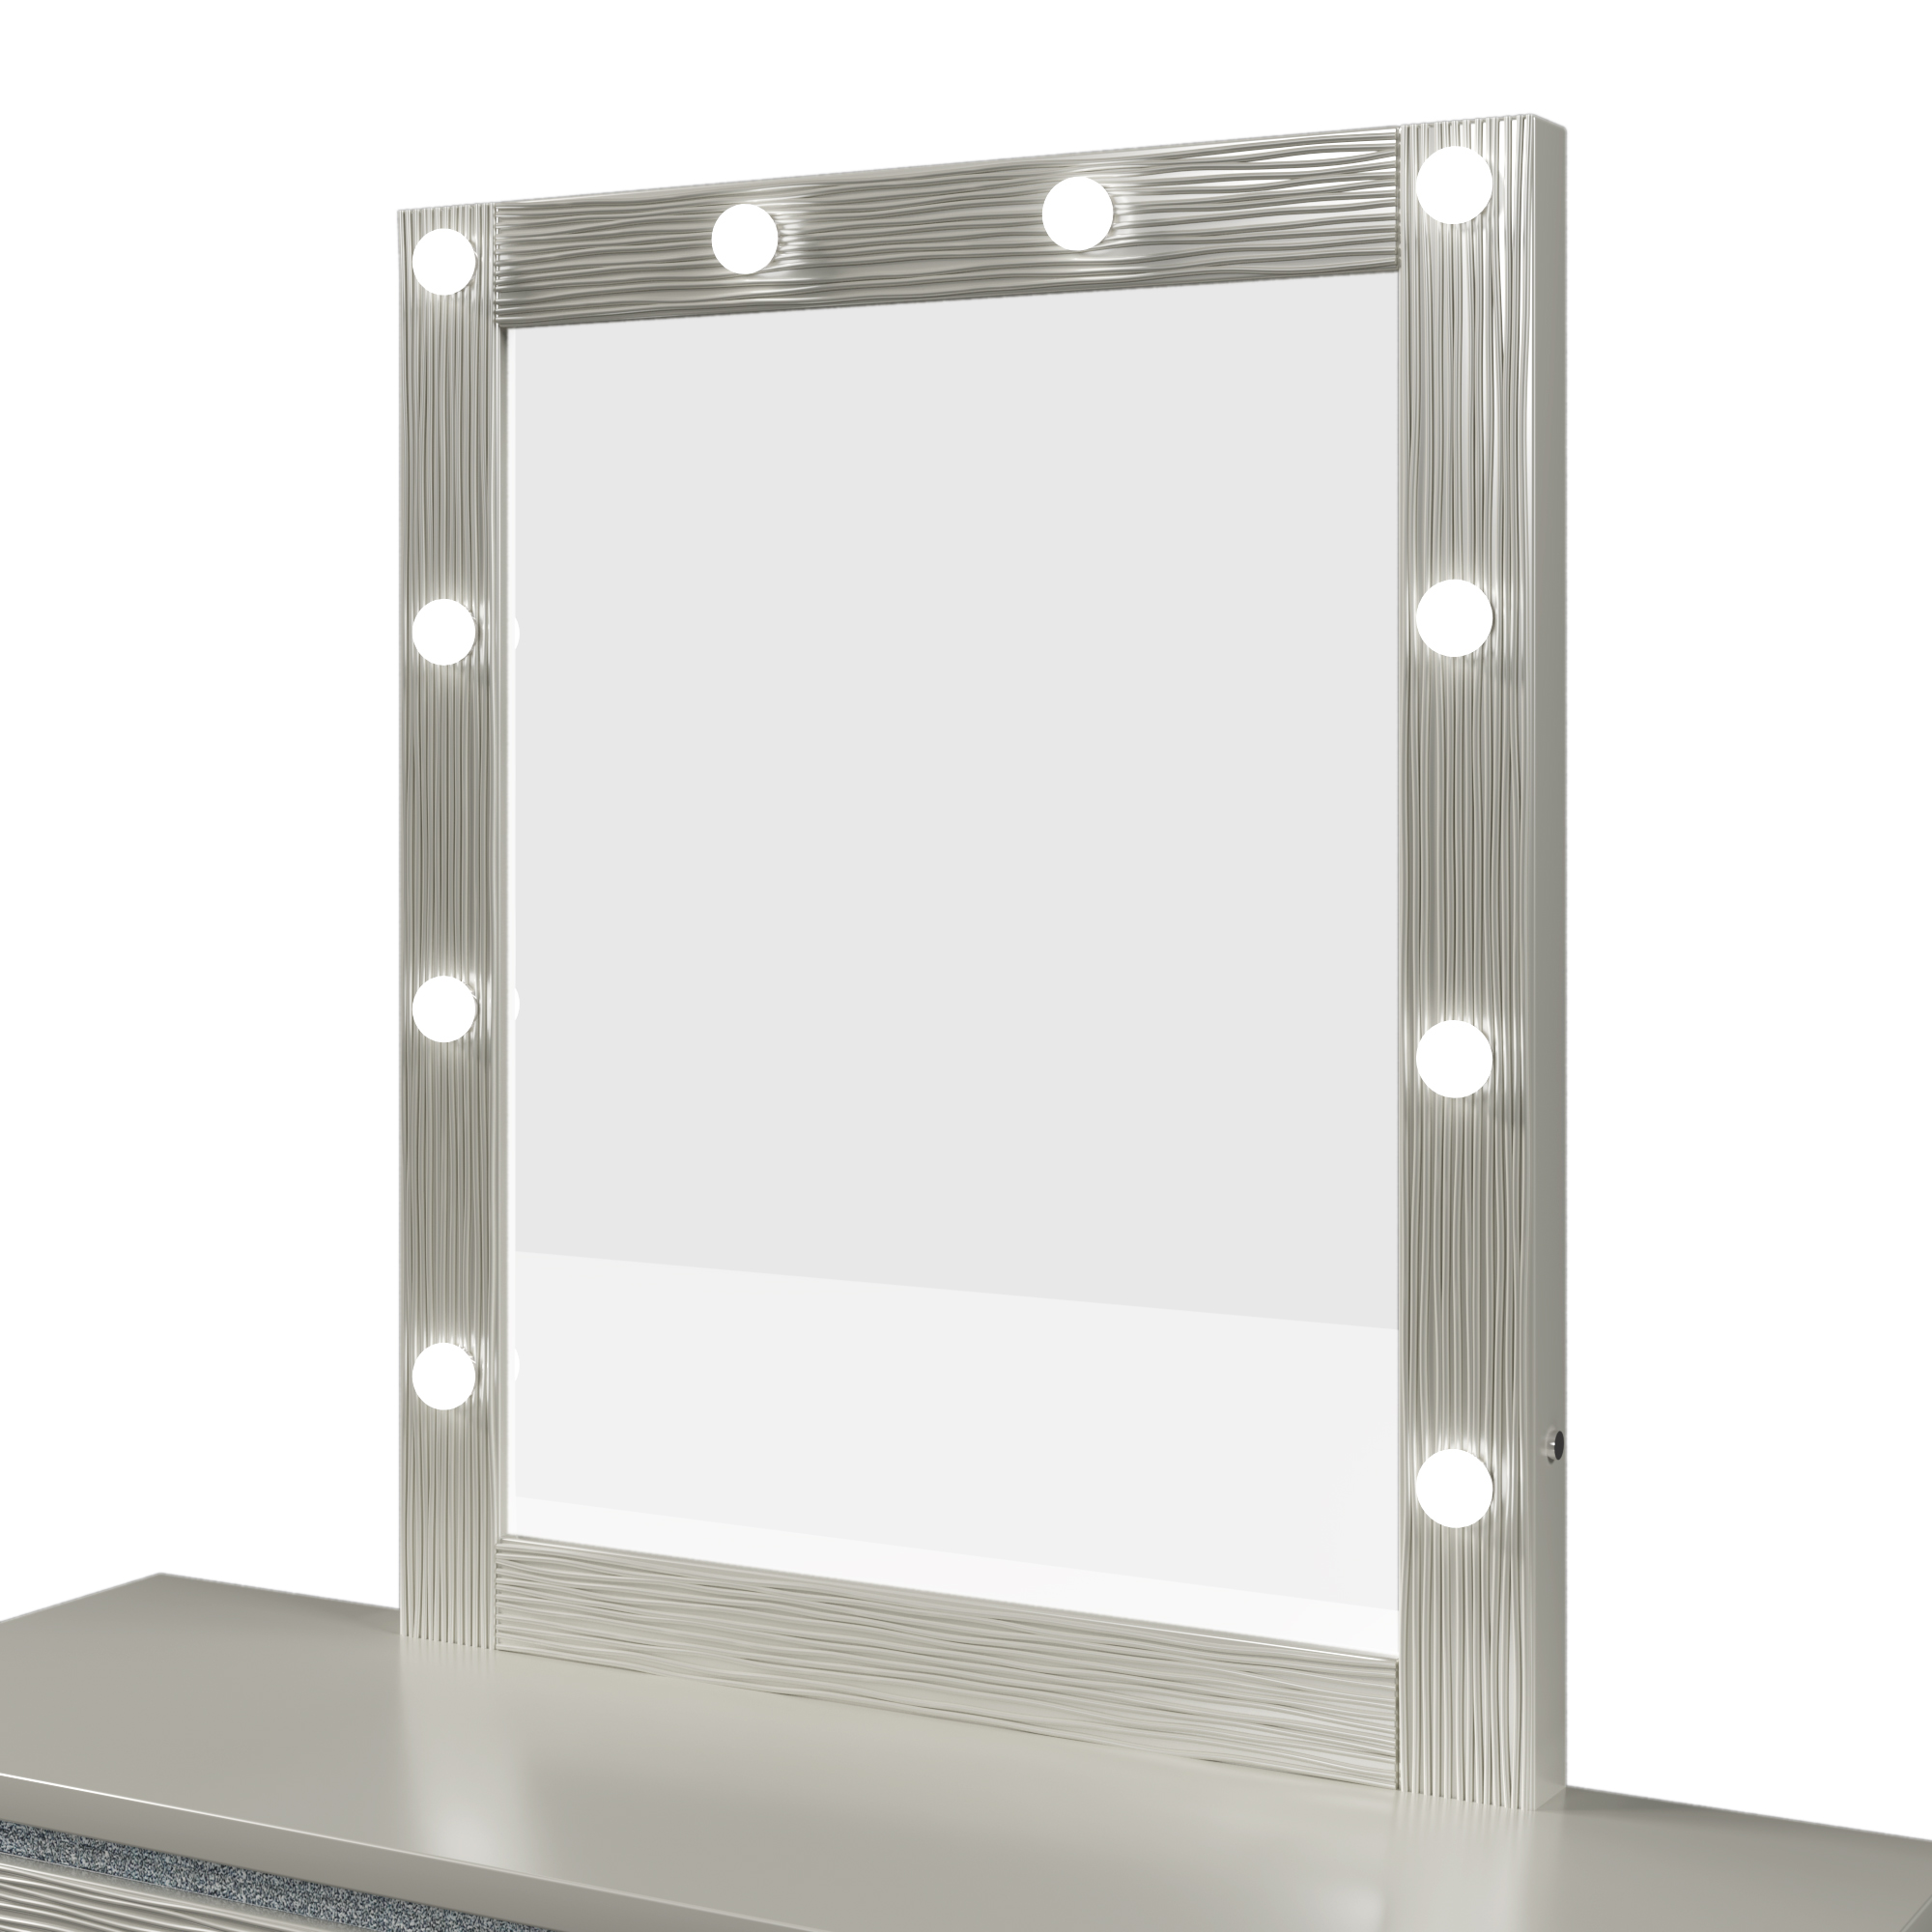 Champagne Silver Mirror with LED Lights